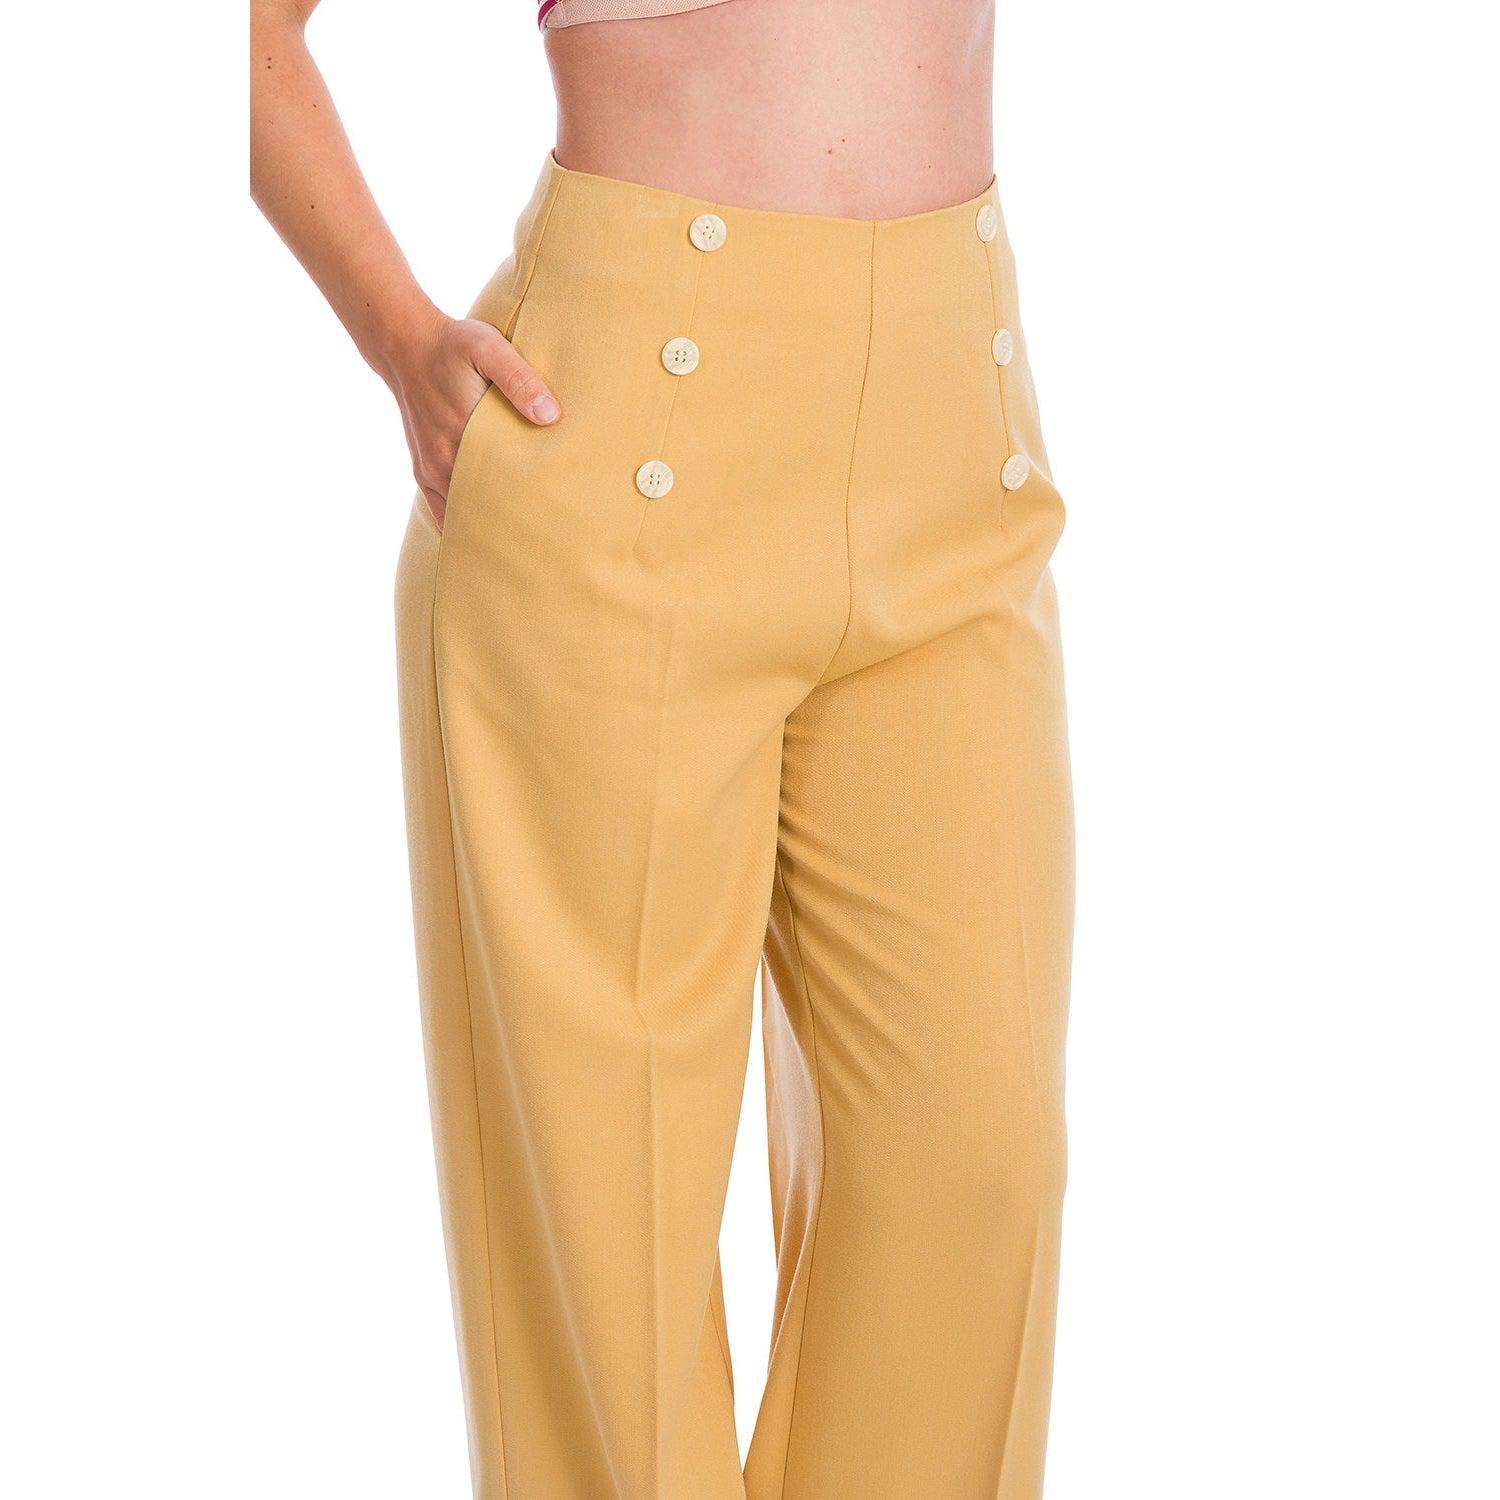 Banned Retro | Pants & Jumpsuits | Brick Colored Trousers By Banned Retro |  Poshmark